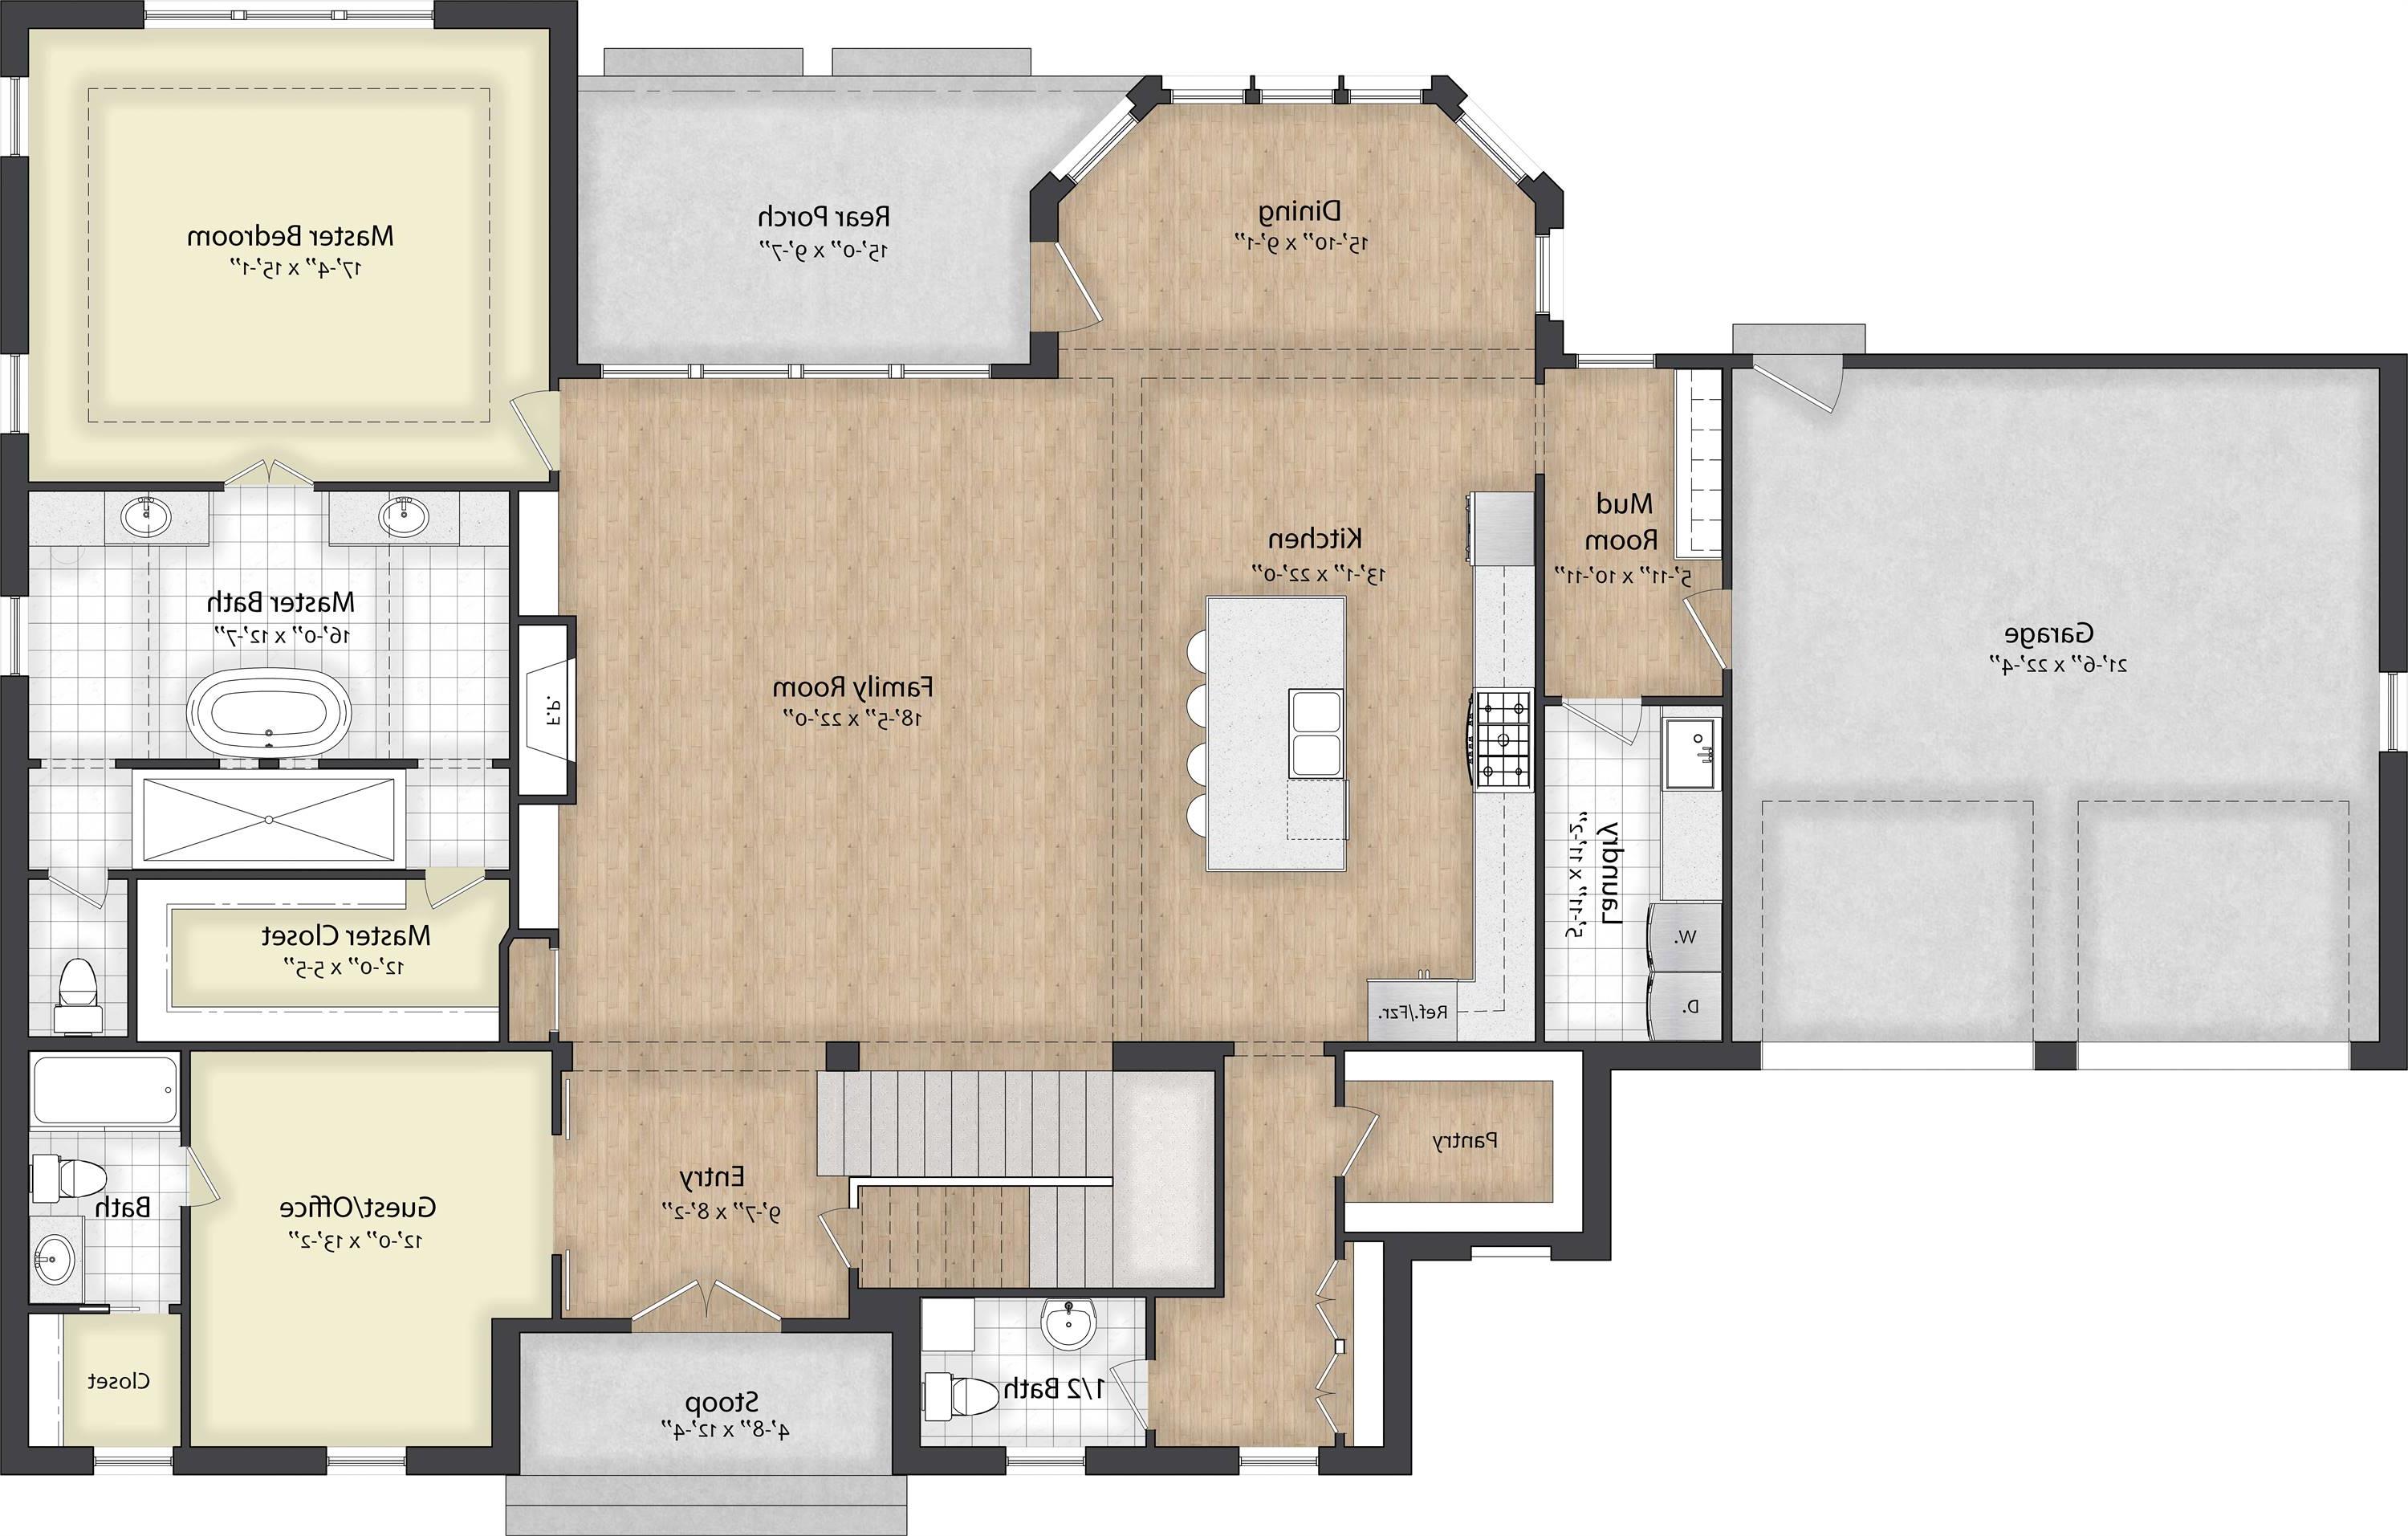 1st Floor image of First Lady House Plan